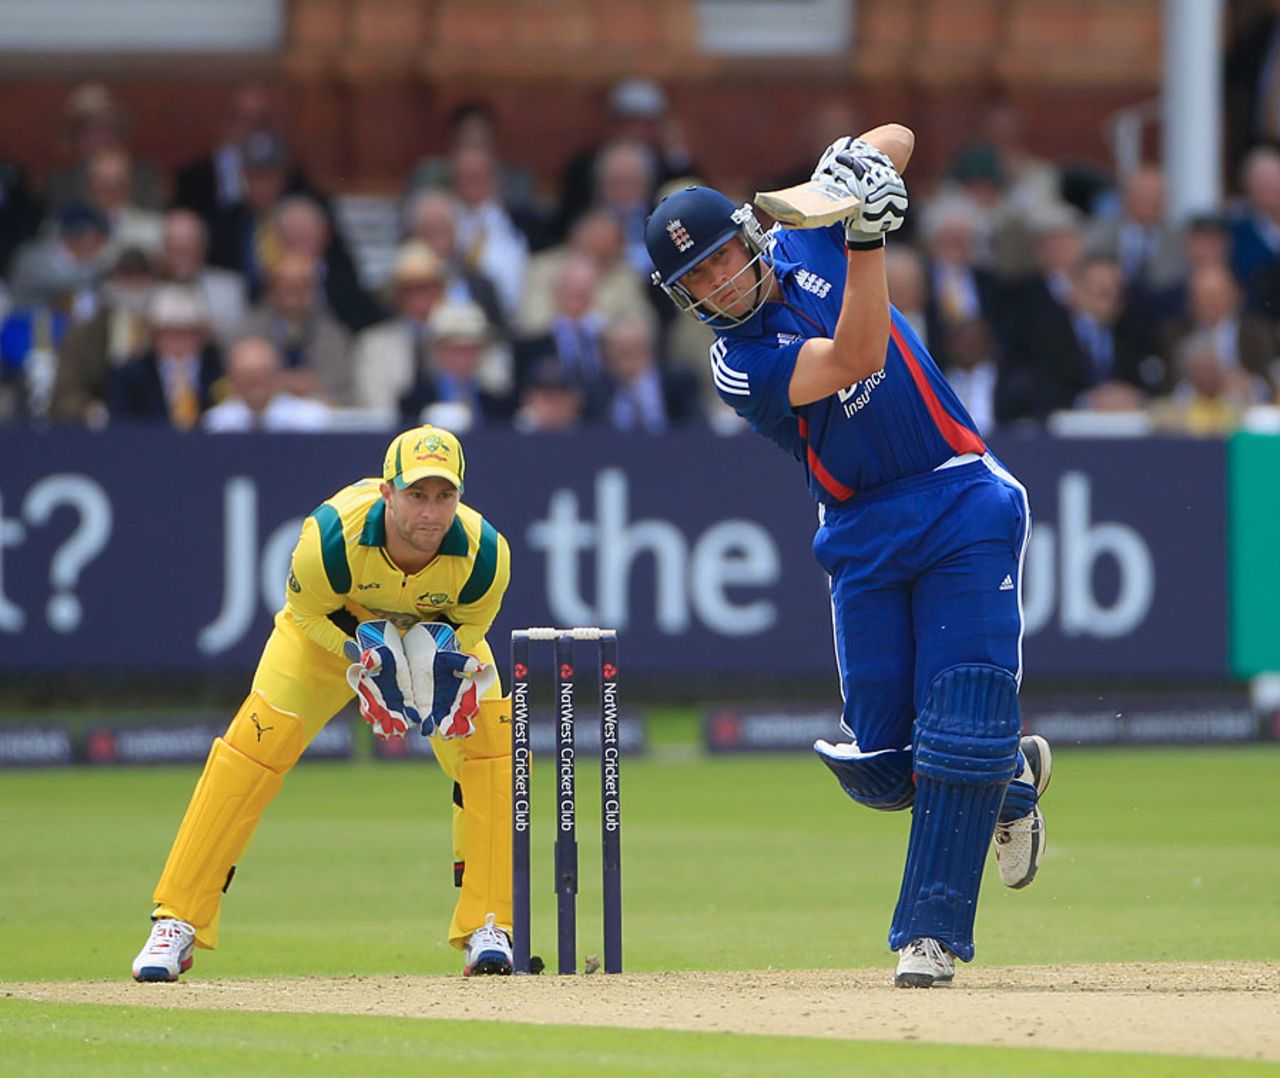 Jonathan Trott goes down the ground during his fifty, England v Australia, 1st ODI, Lord's, June 29, 2012